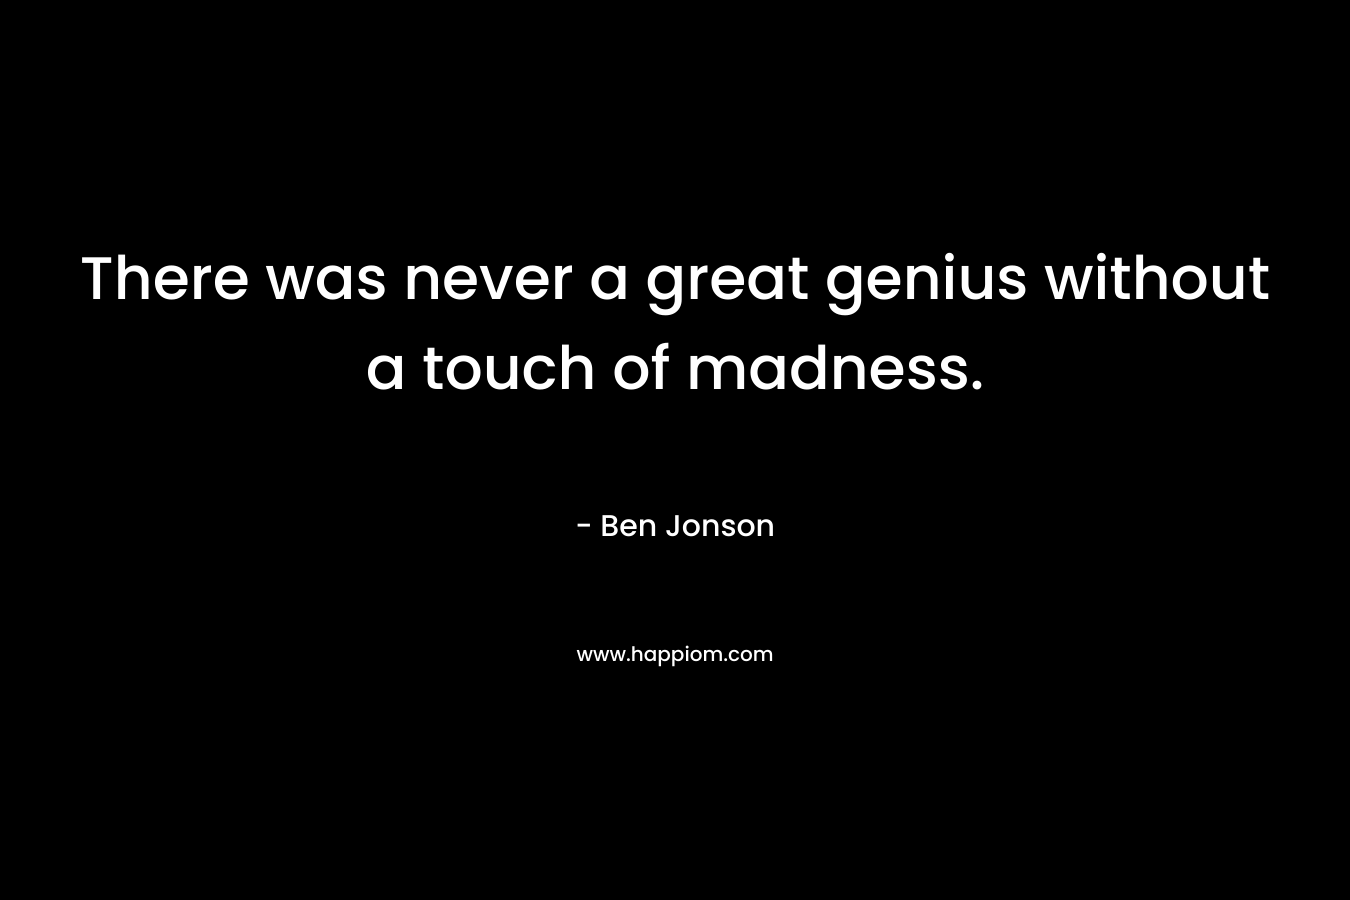 There was never a great genius without a touch of madness.